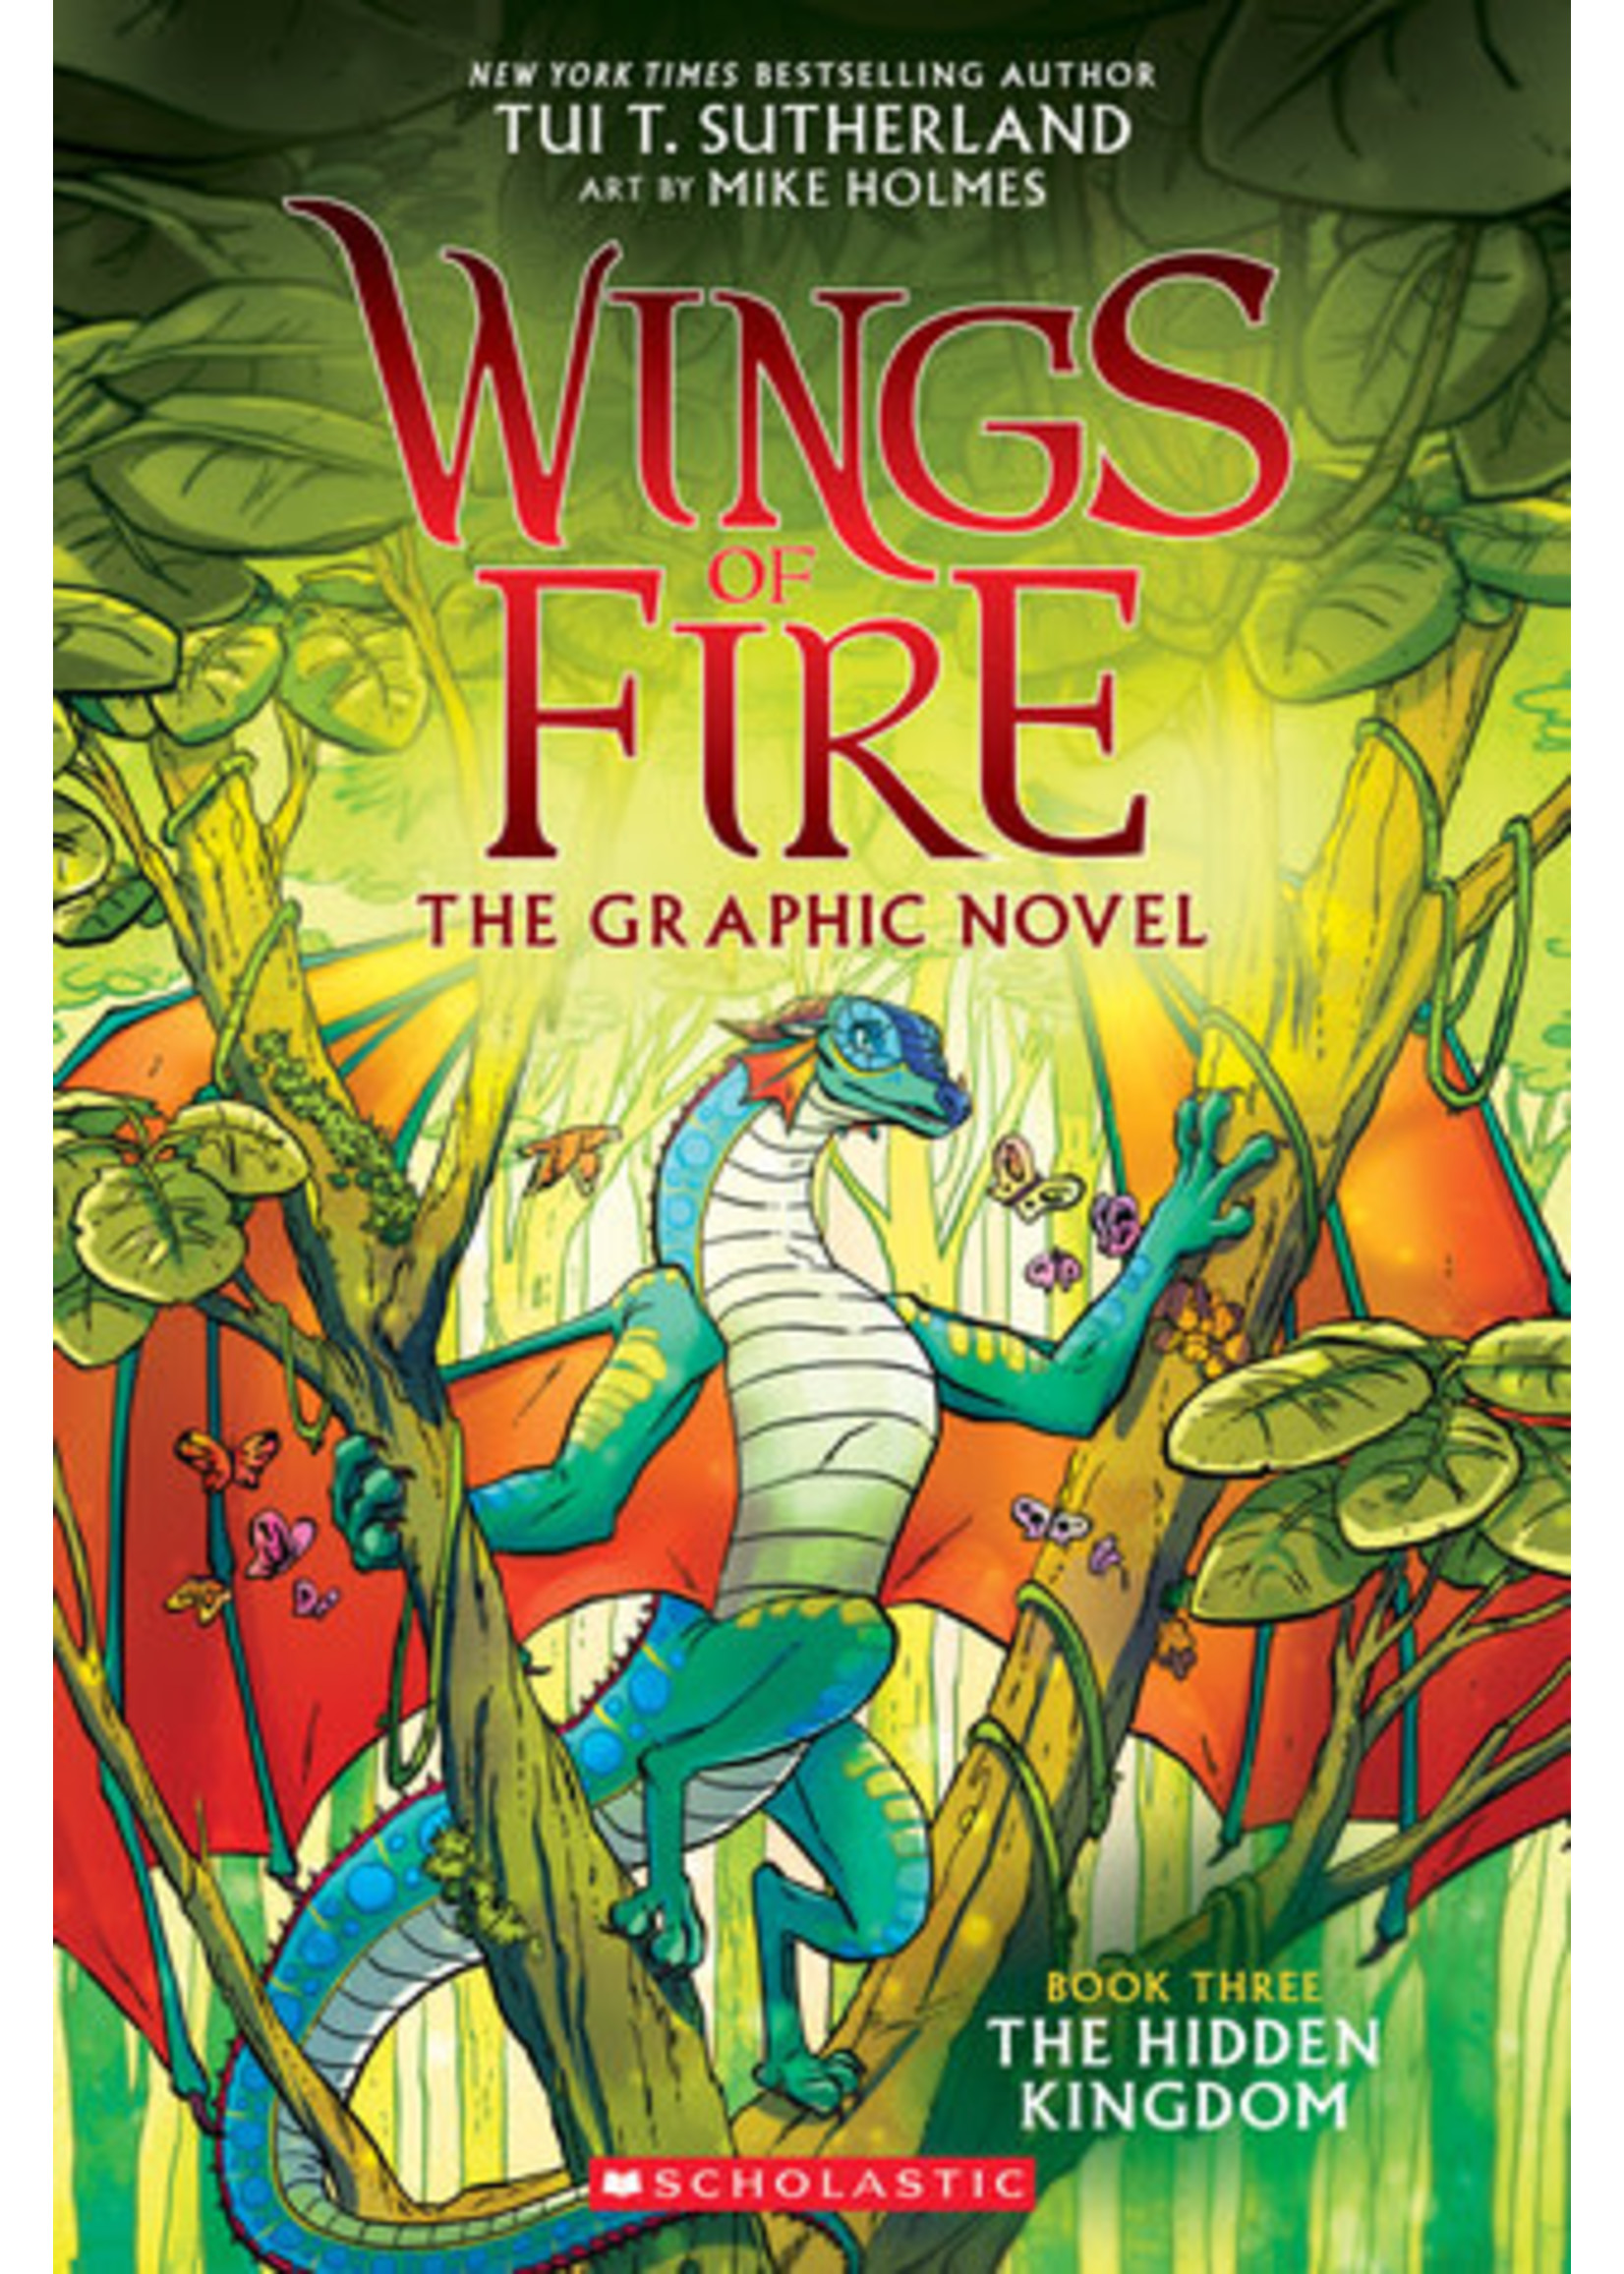 The Hidden Kingdom (Wings of Fire Graphic Novel #3) by Tui T. Sutherland, Mike Holmes